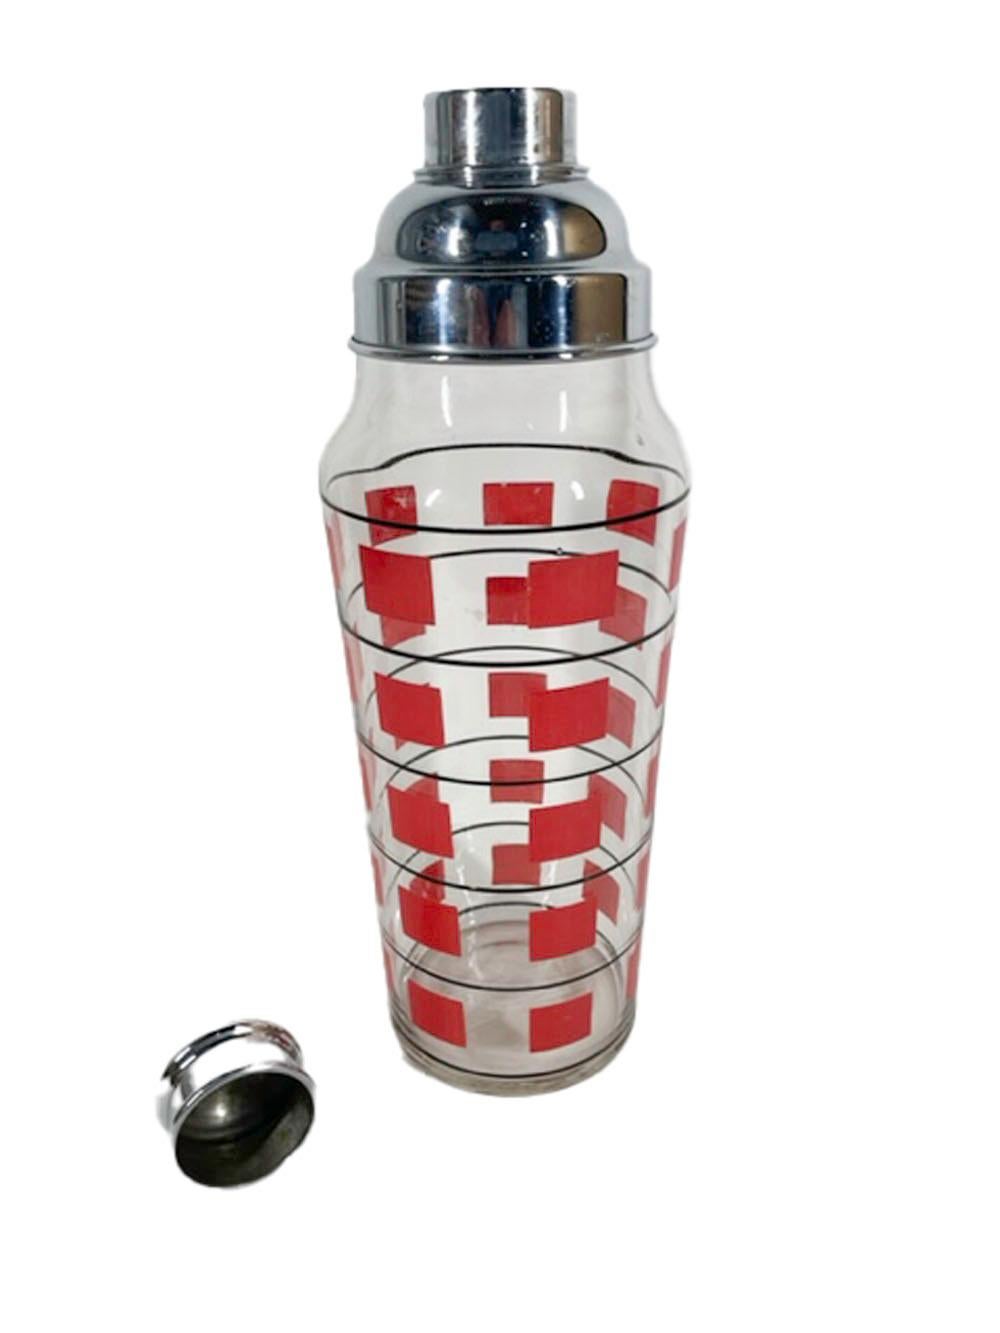 20th Century Art Deco Cocktail Shaker with Bands of Red Squares Between Black Lines For Sale